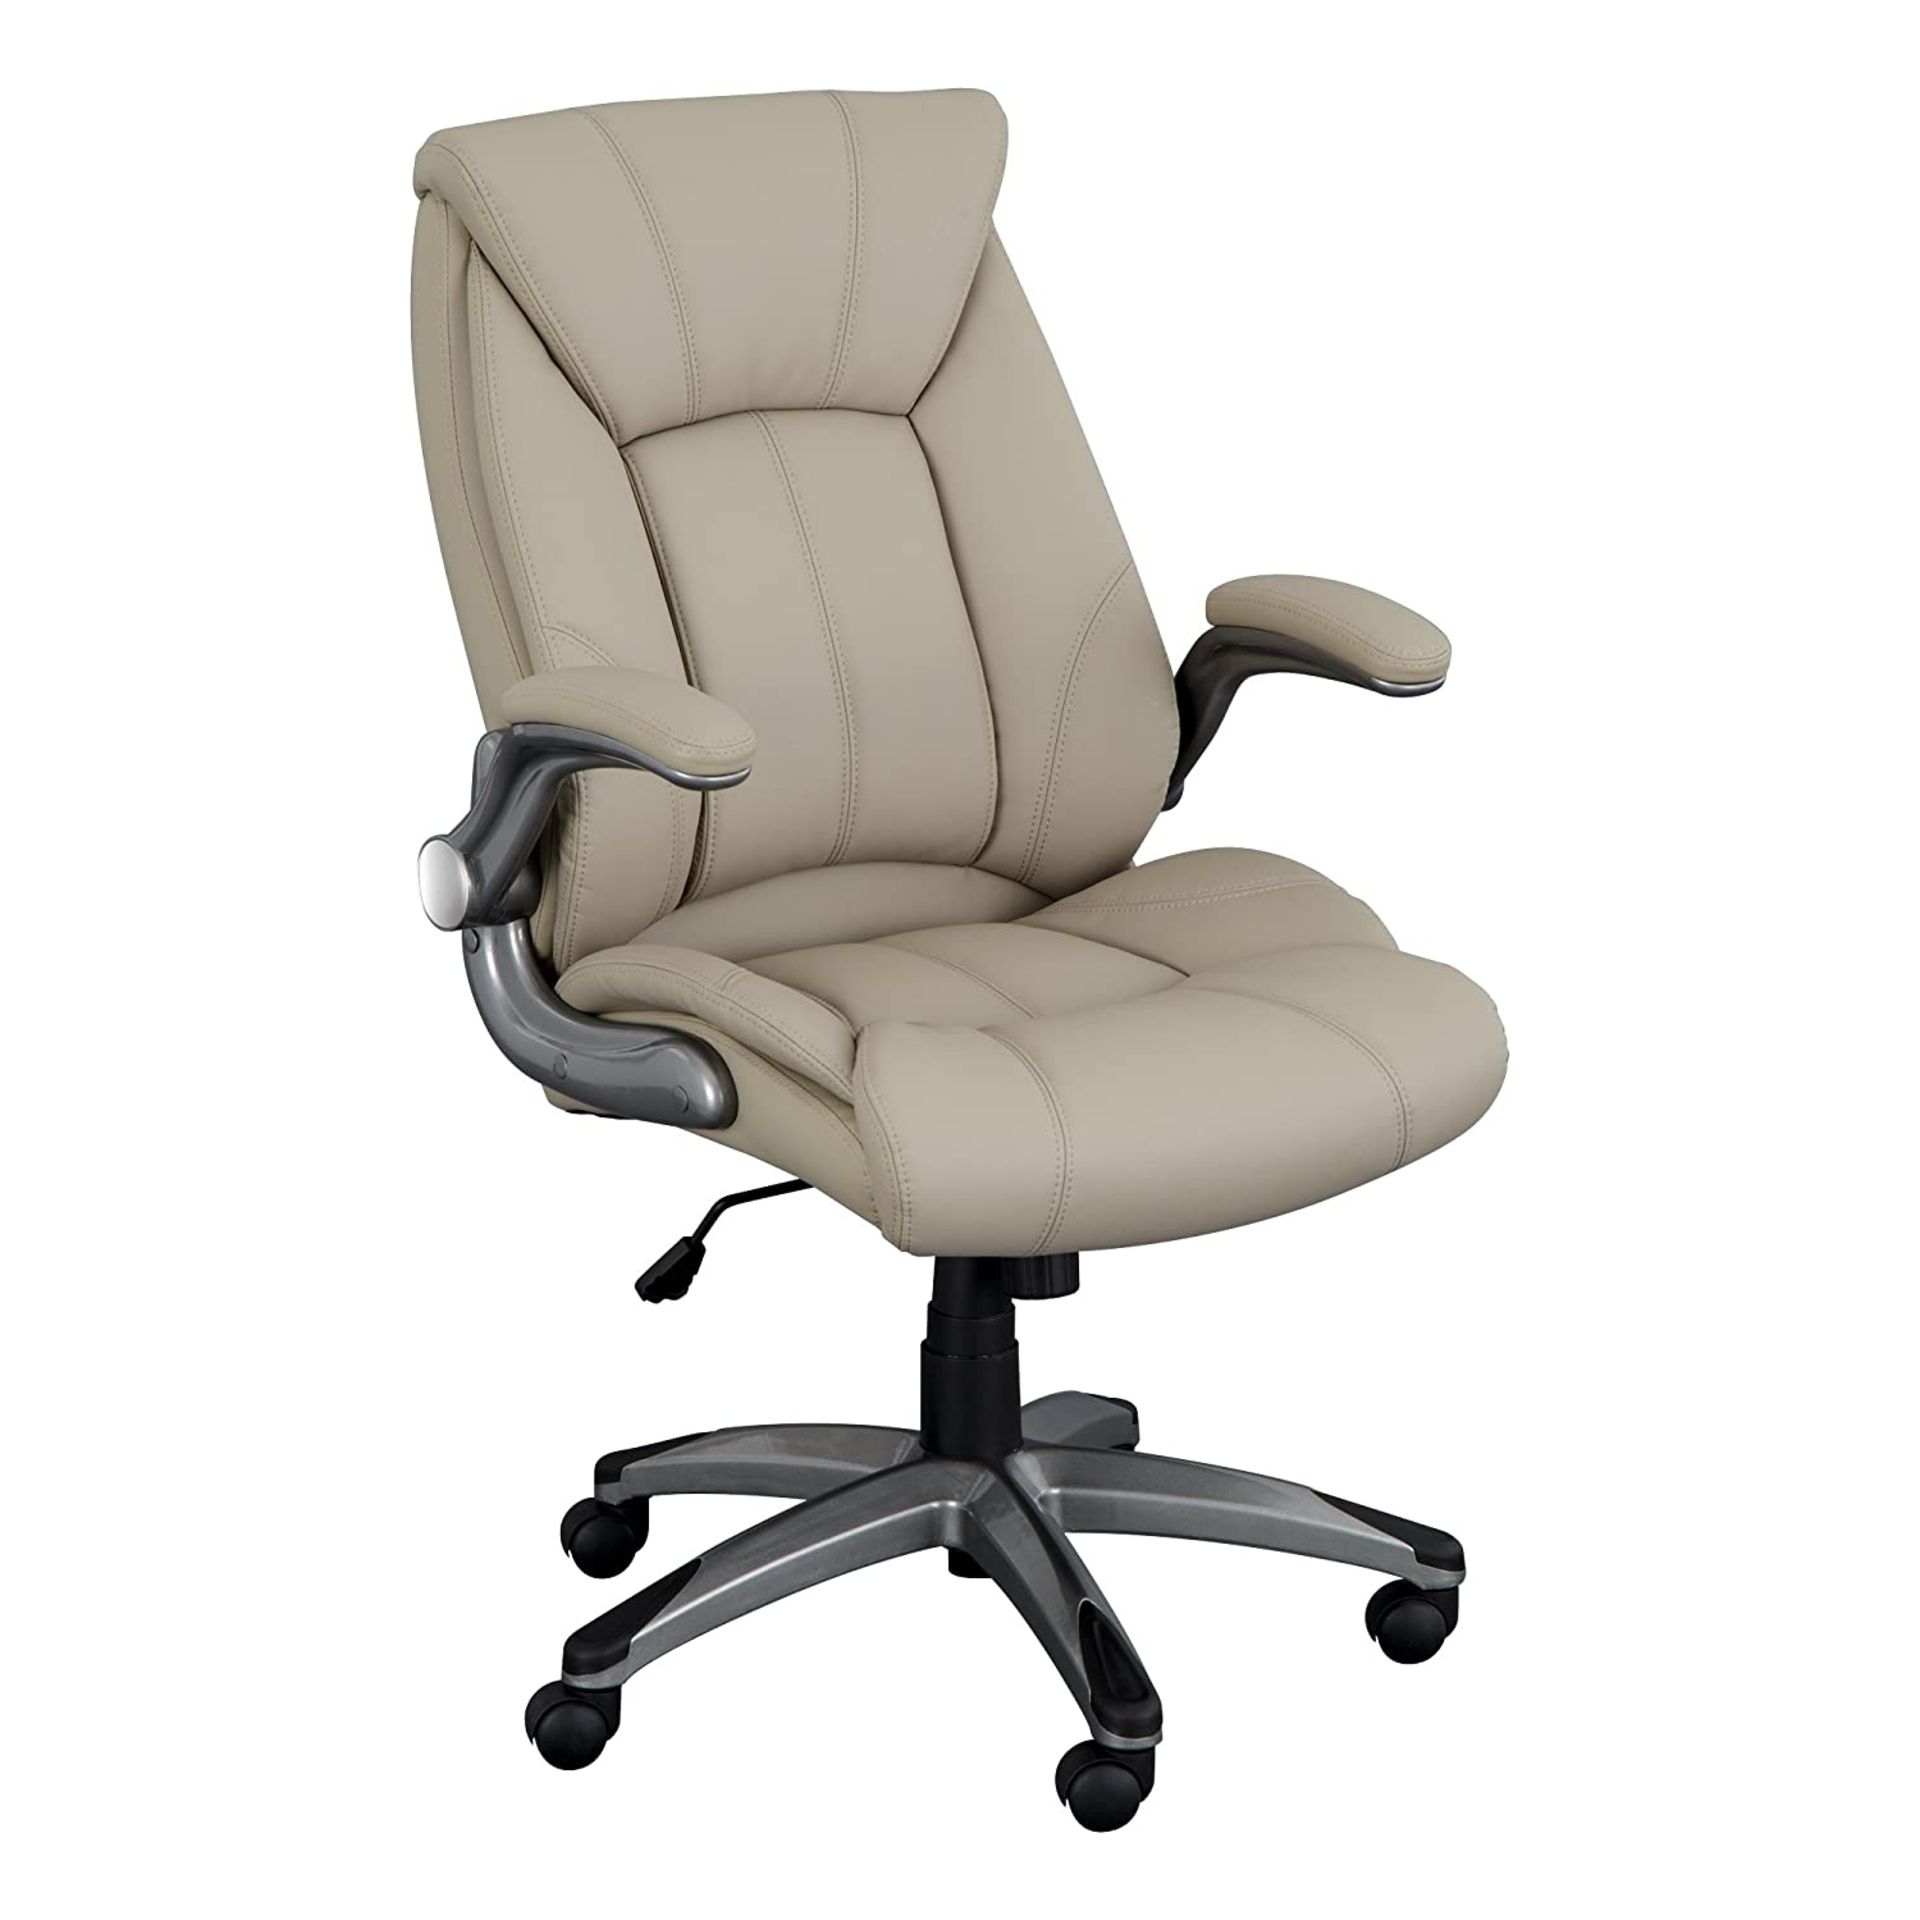 Premium PU-Leather High Back Executive Office Desk Chair with Flip-Up Arms, Champagne